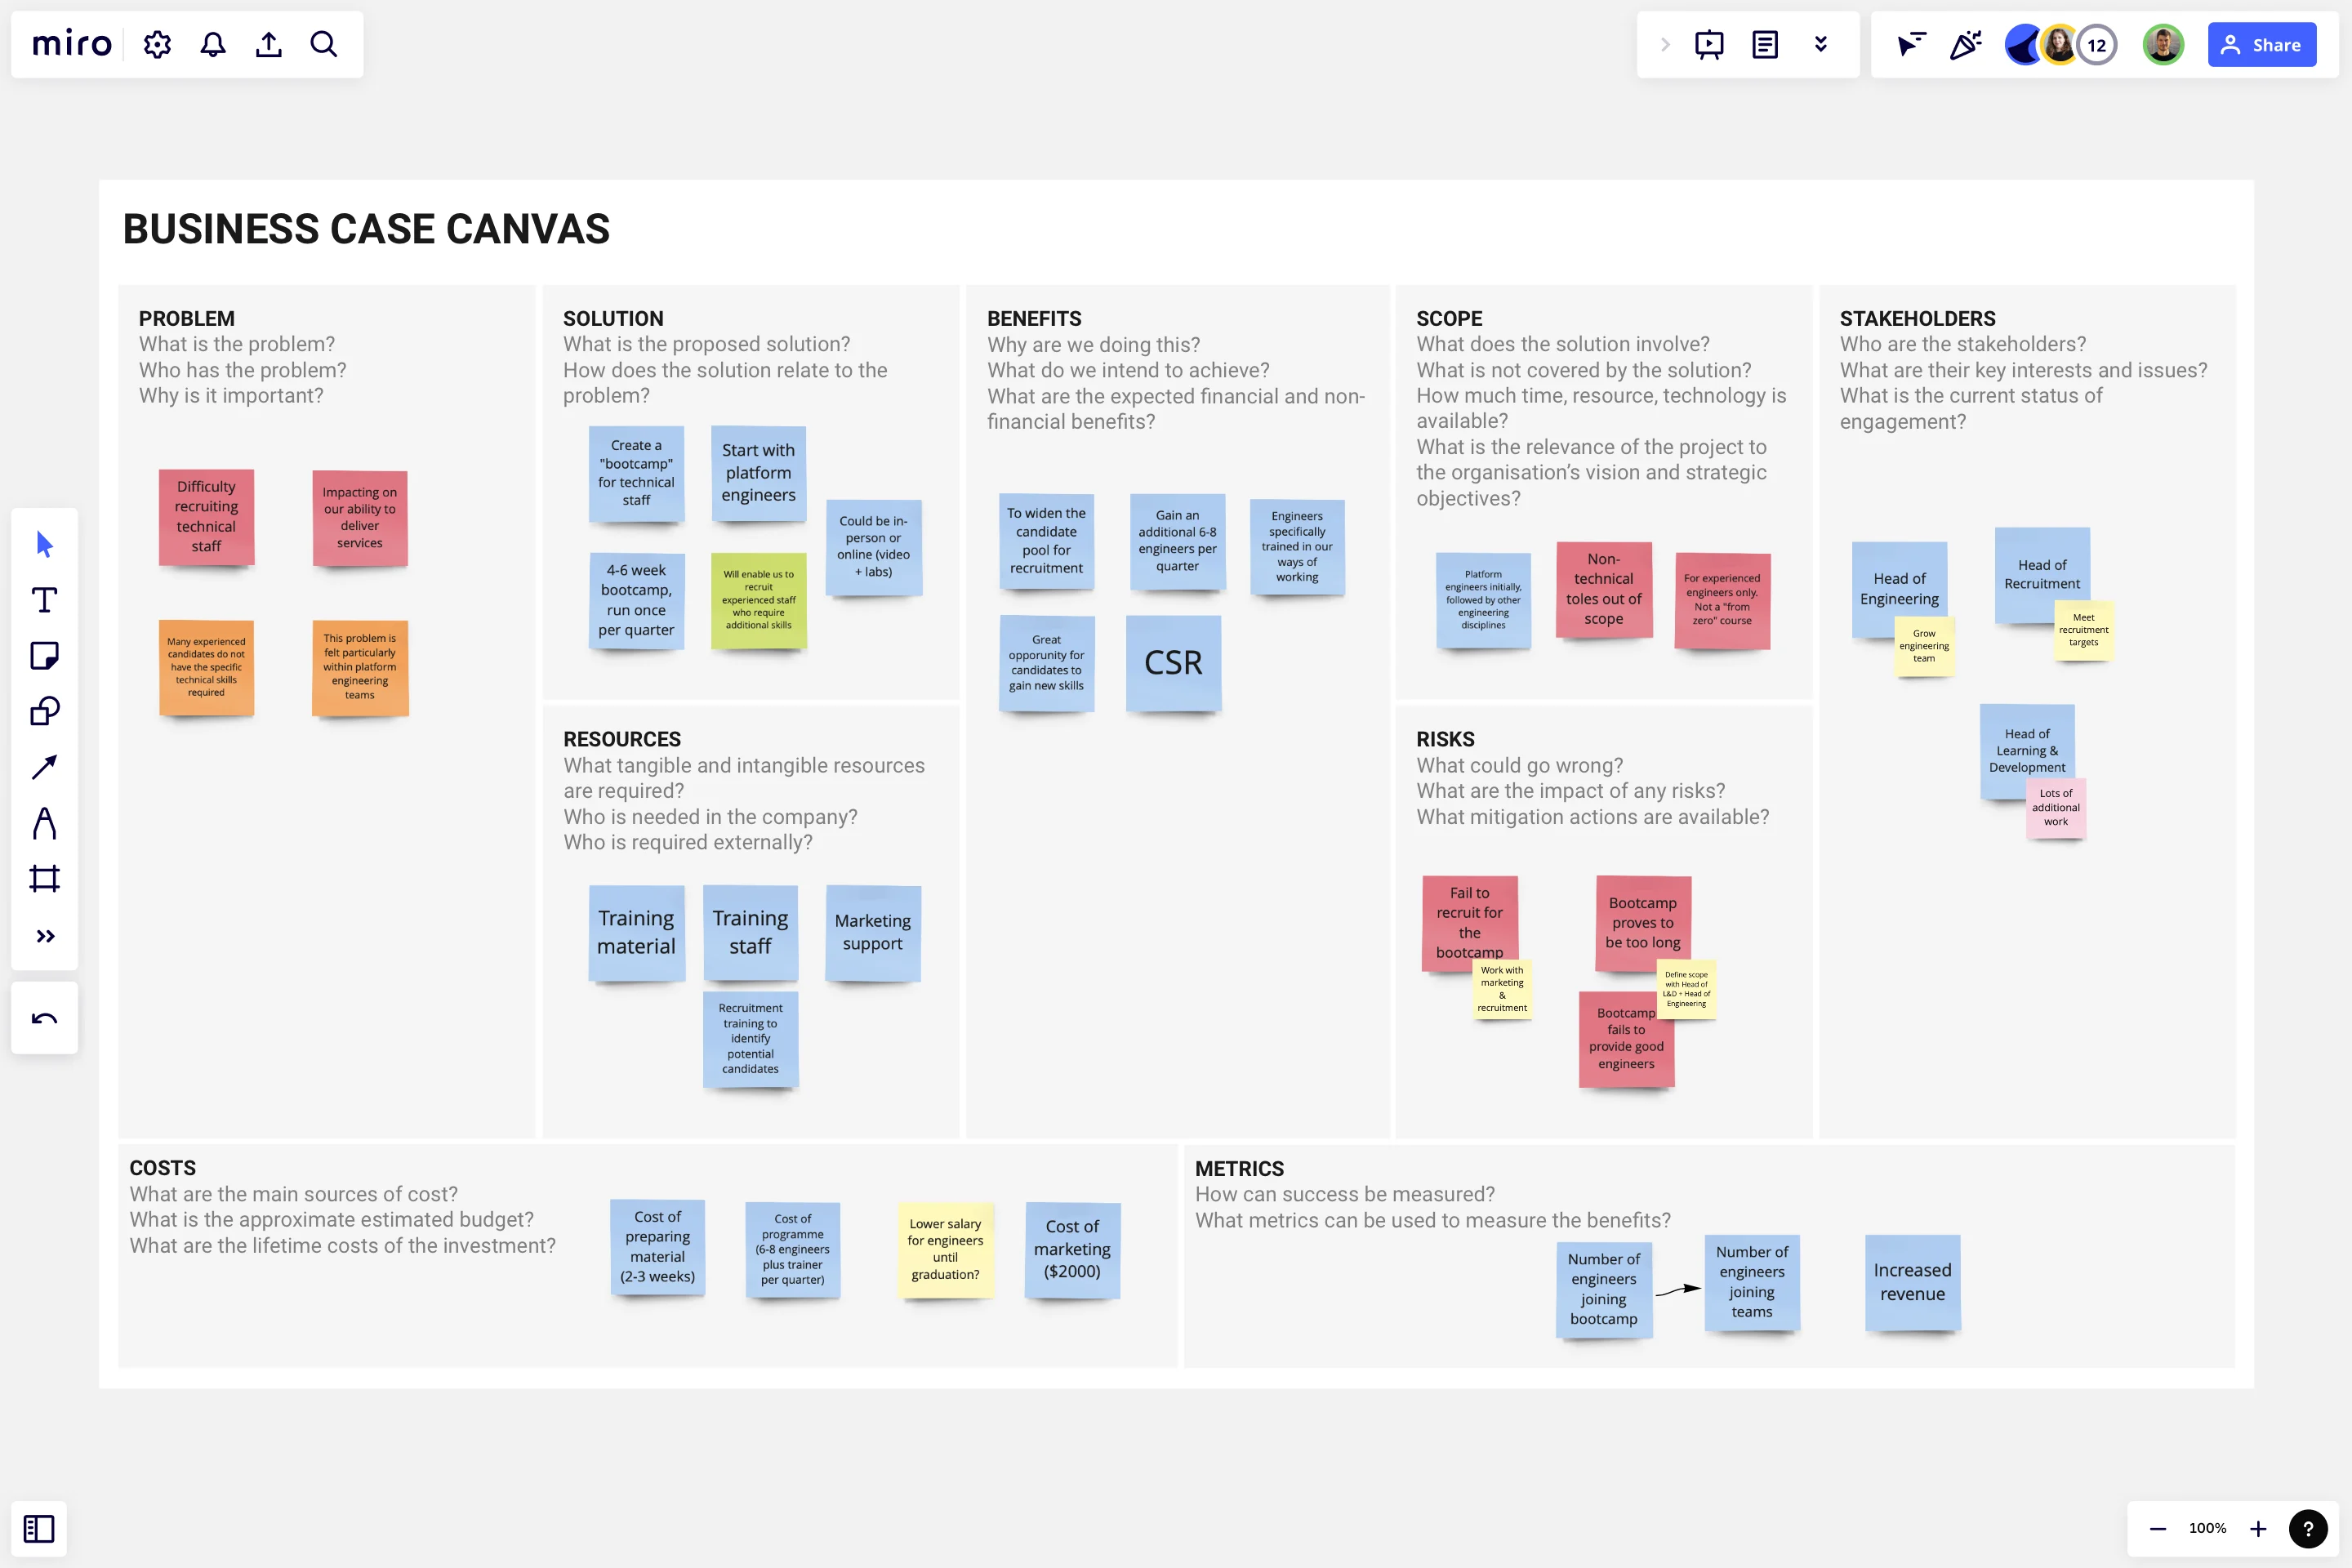 Business Case Canvas by Steve Lydford